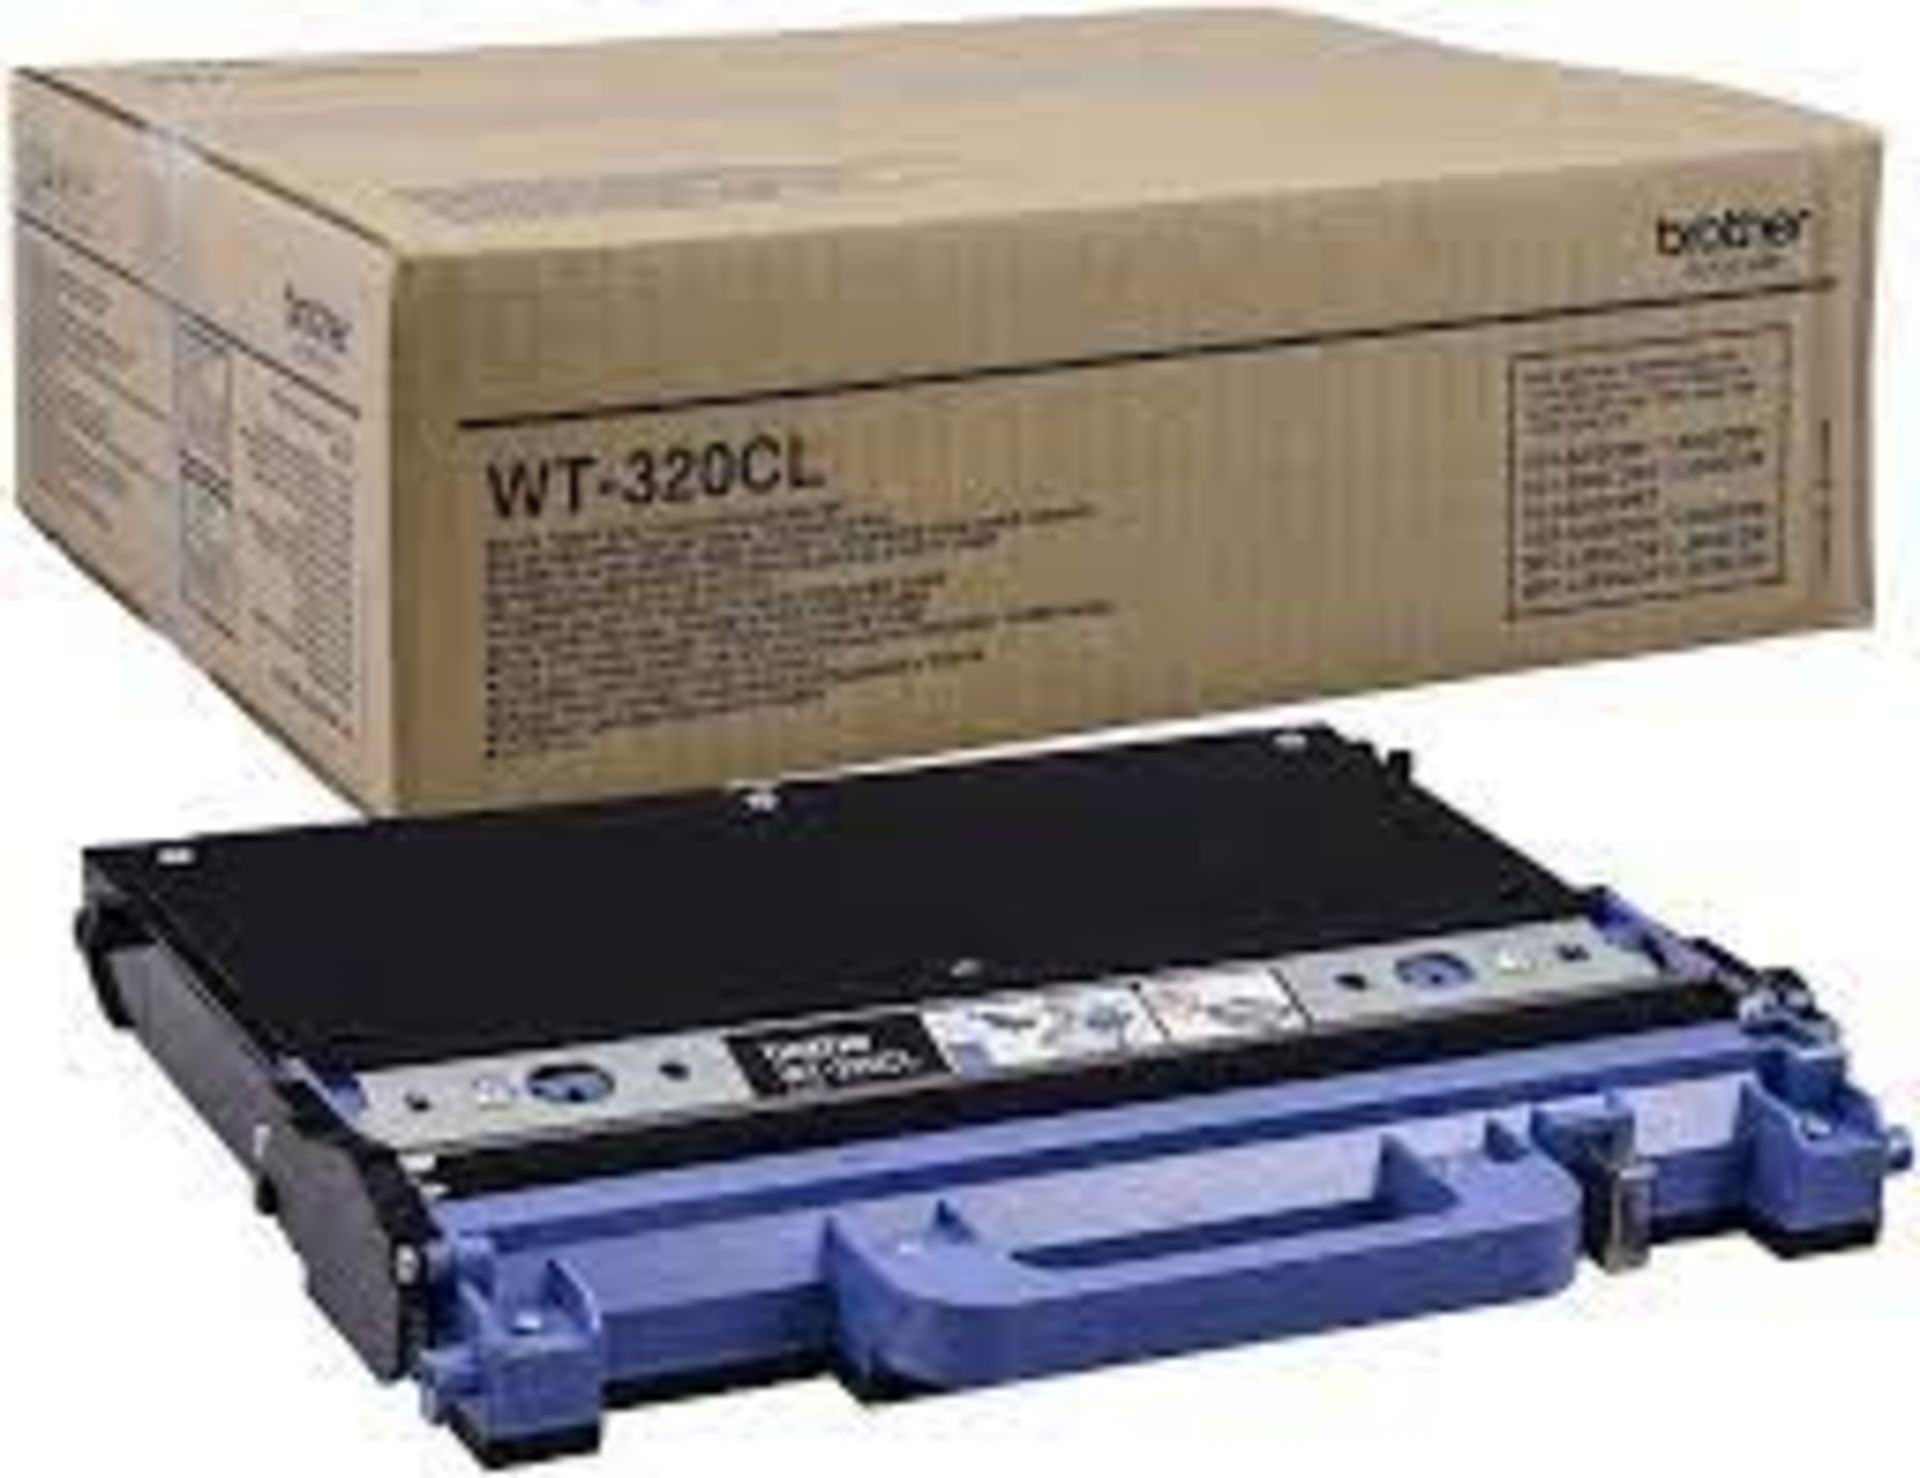 2 X BRAND NEW BROTHER WT-320CL WASTE TONER BOX R15